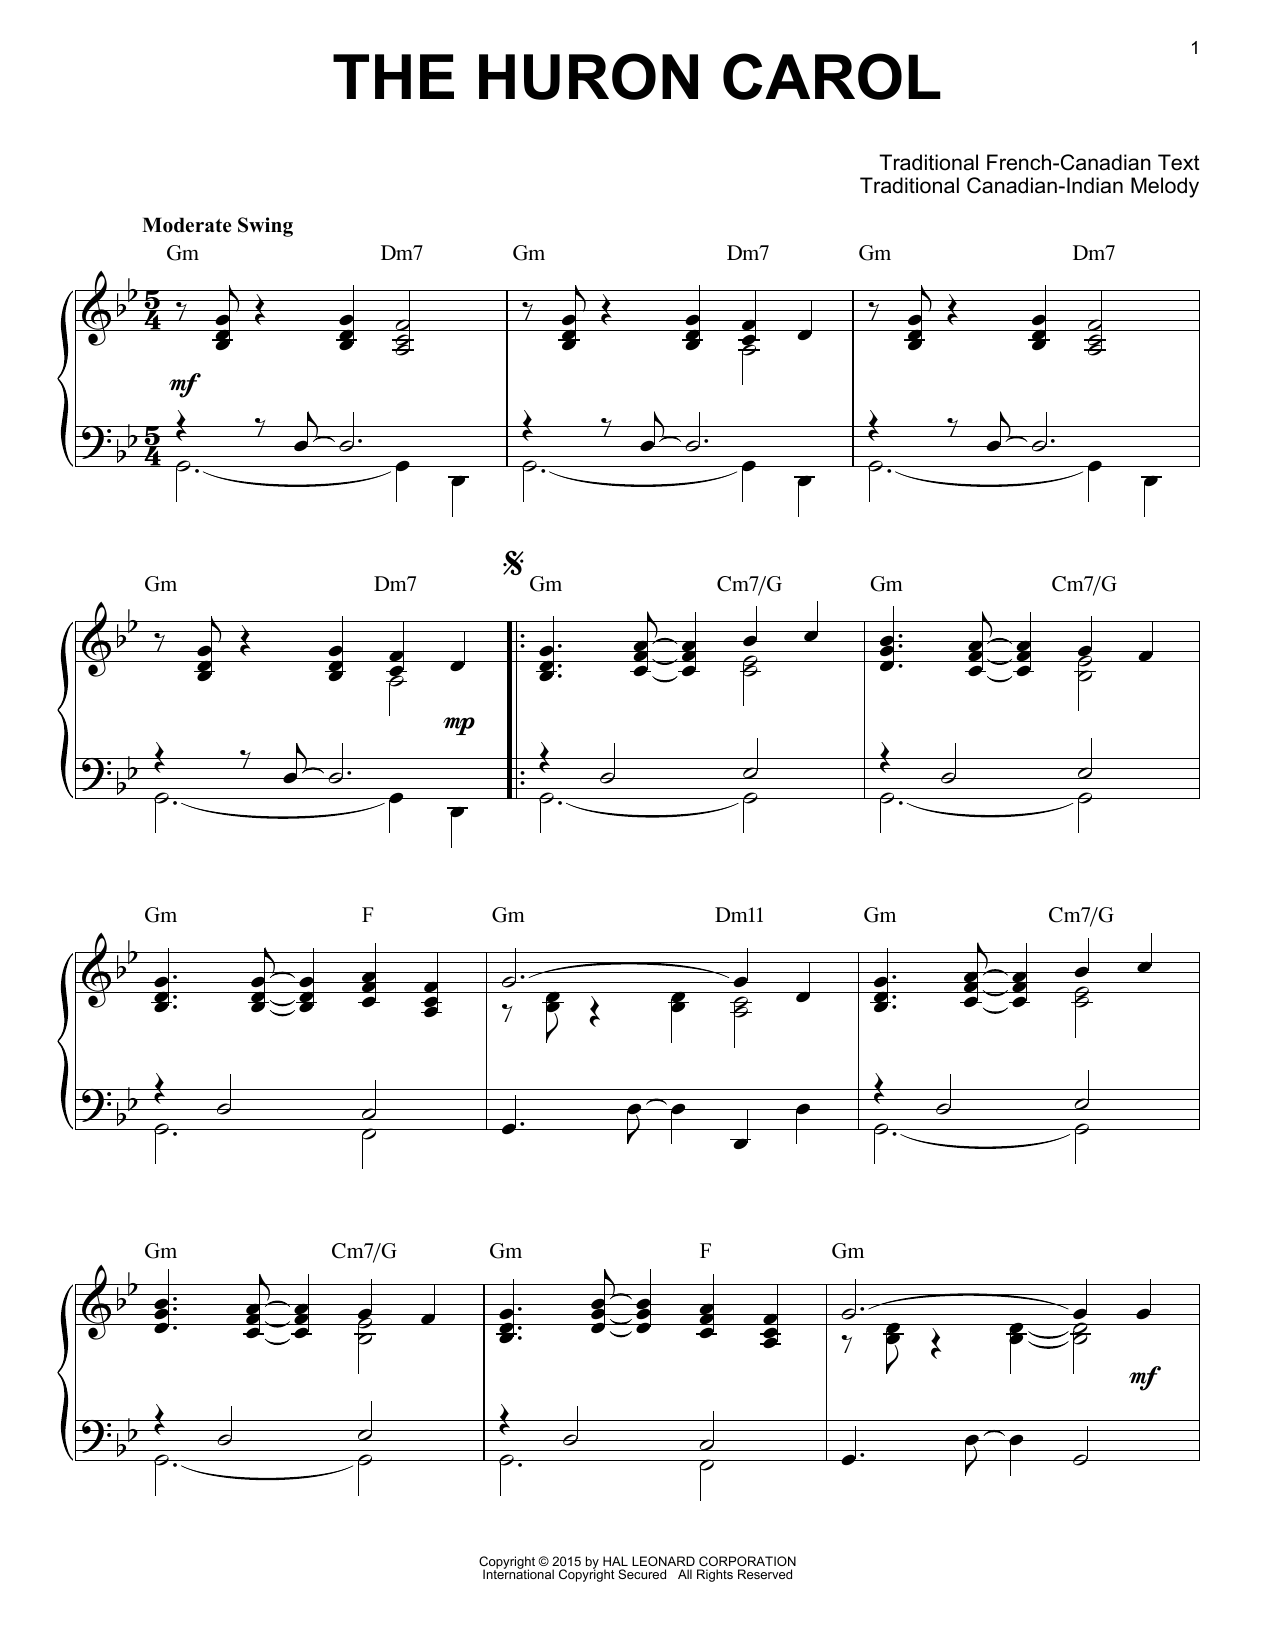 Download Trad. French-Canadian Text The Huron Carol [Jazz version] (arr. Br Sheet Music